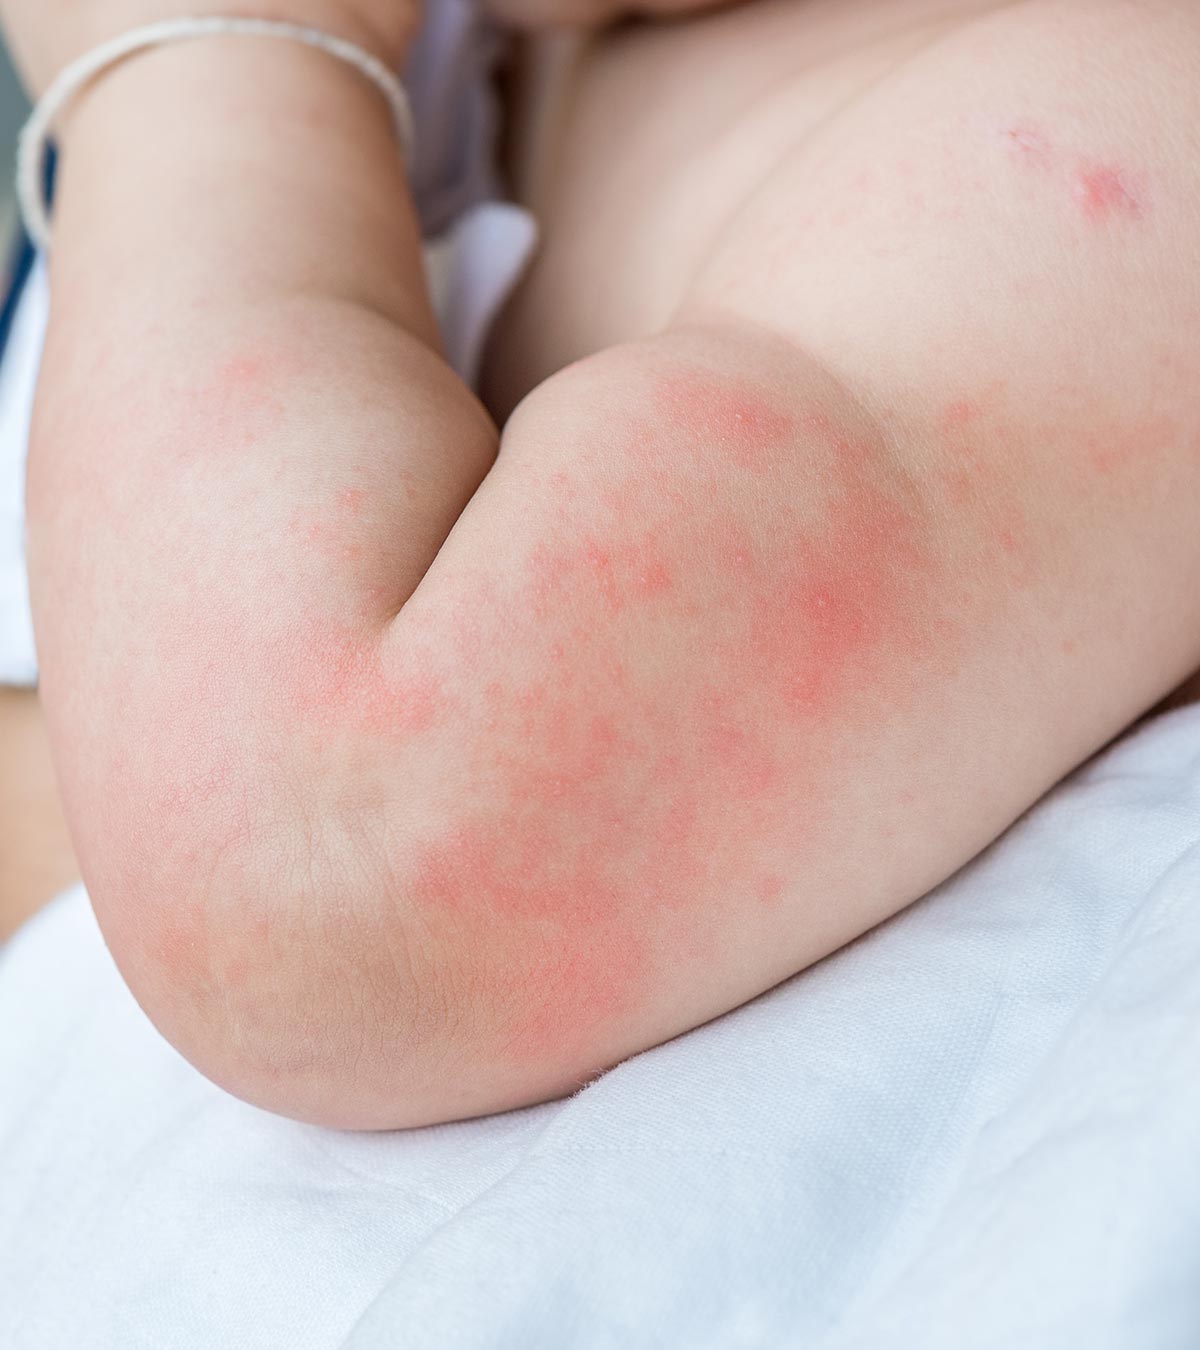 Hives On Baby: Causes, Symptoms, Treatment And Prevention